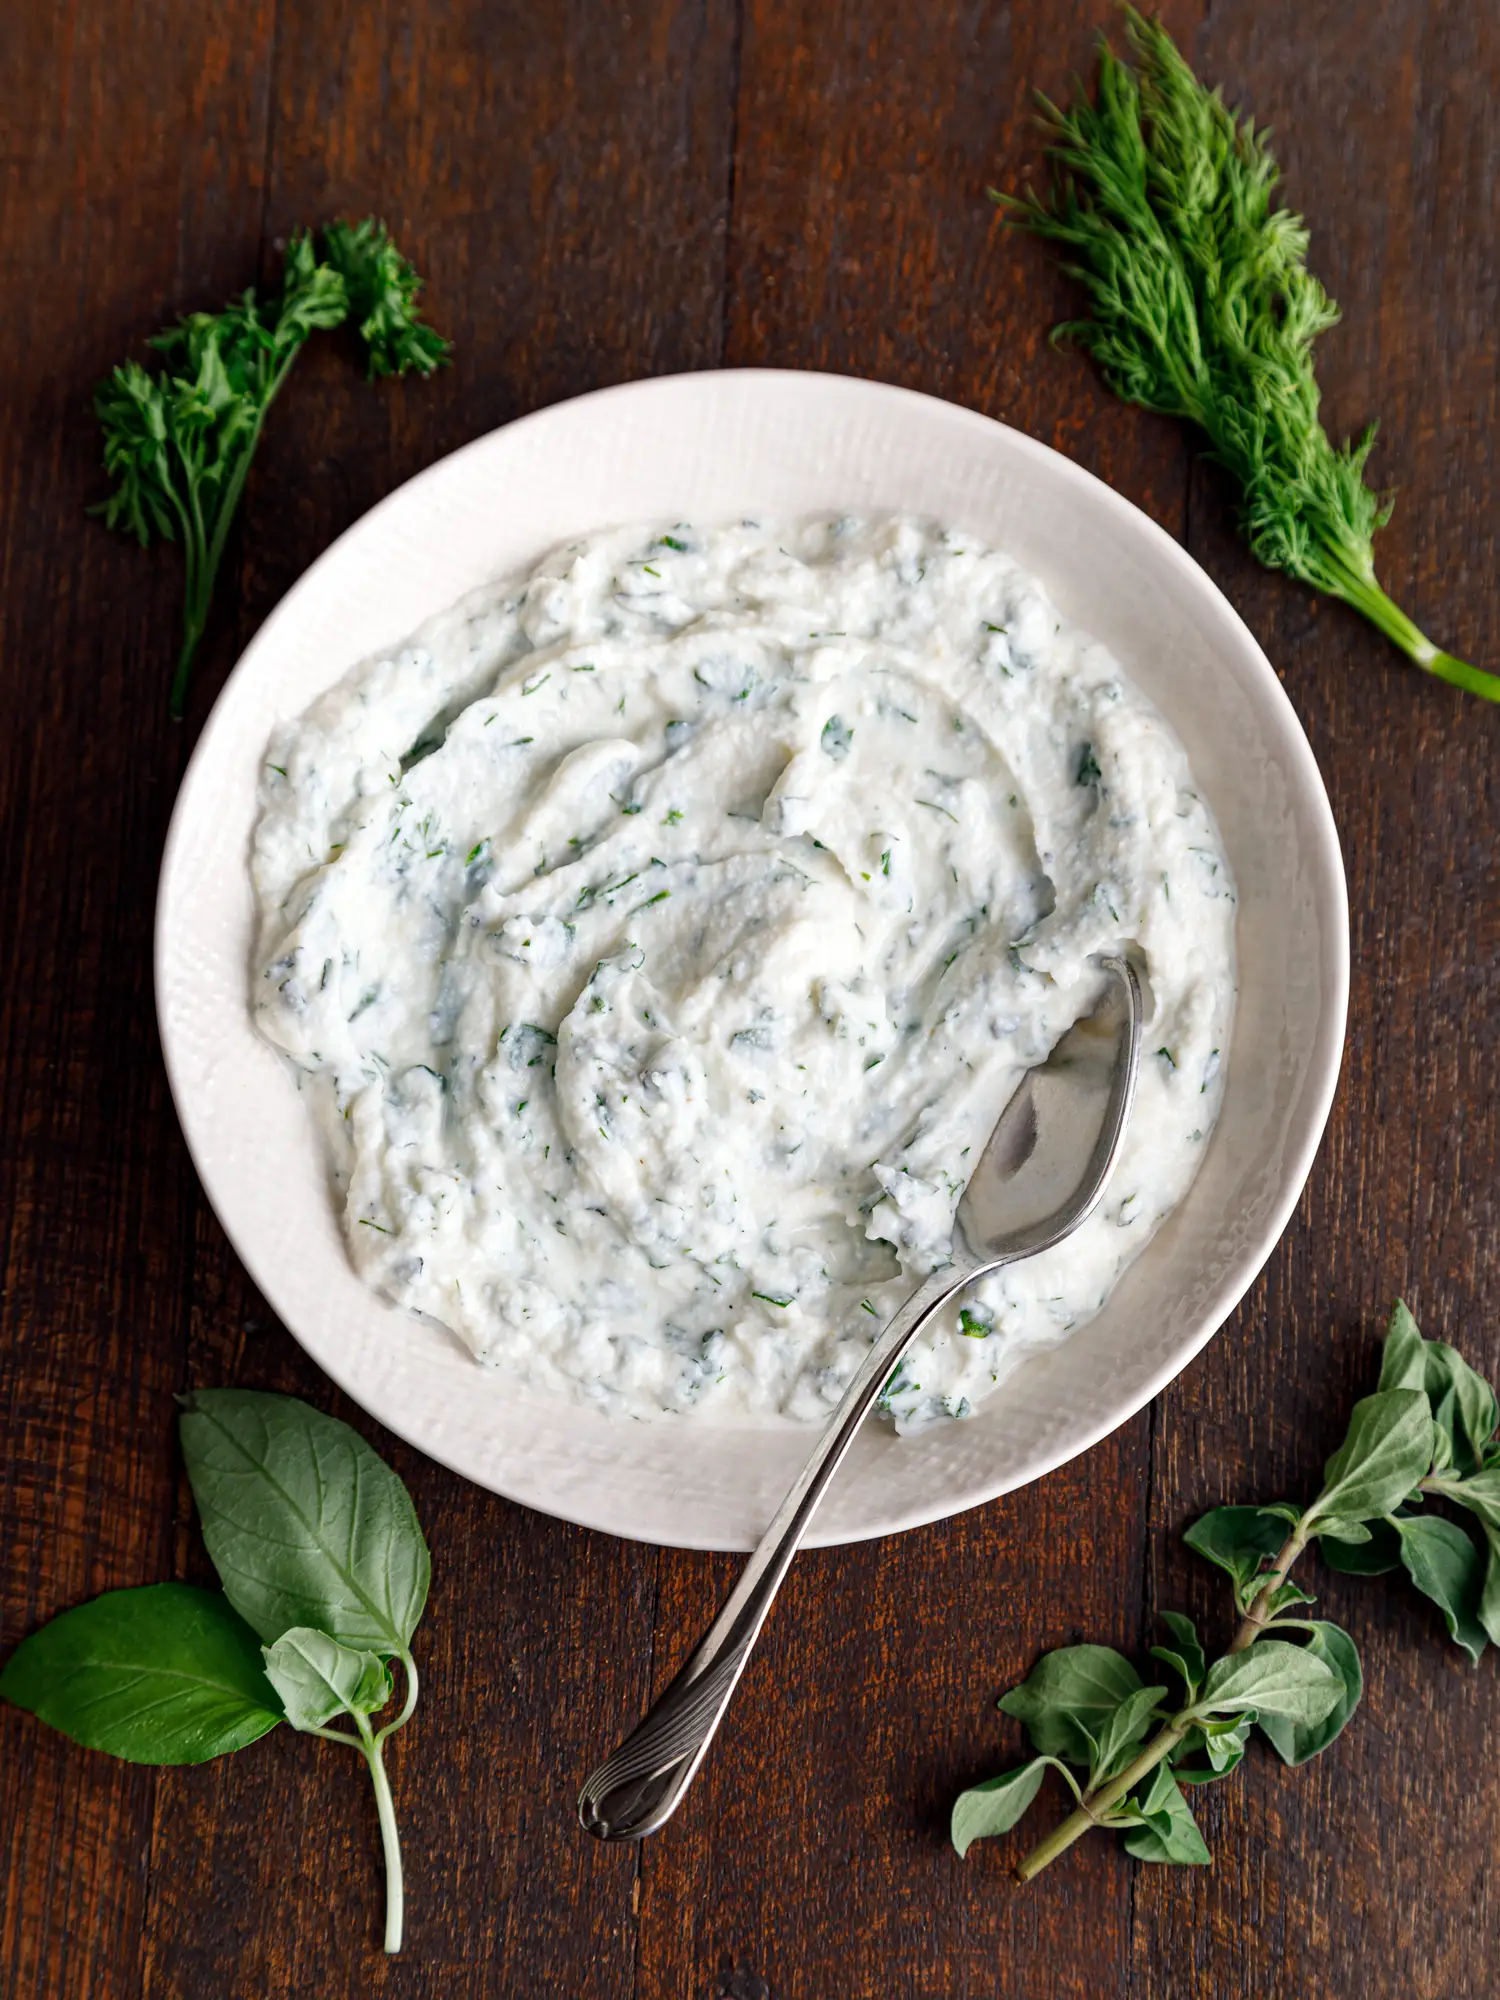 A white bowl of herbed ricotta cheese on a table surrounded by fresh herbs like basil, dill, and parsley